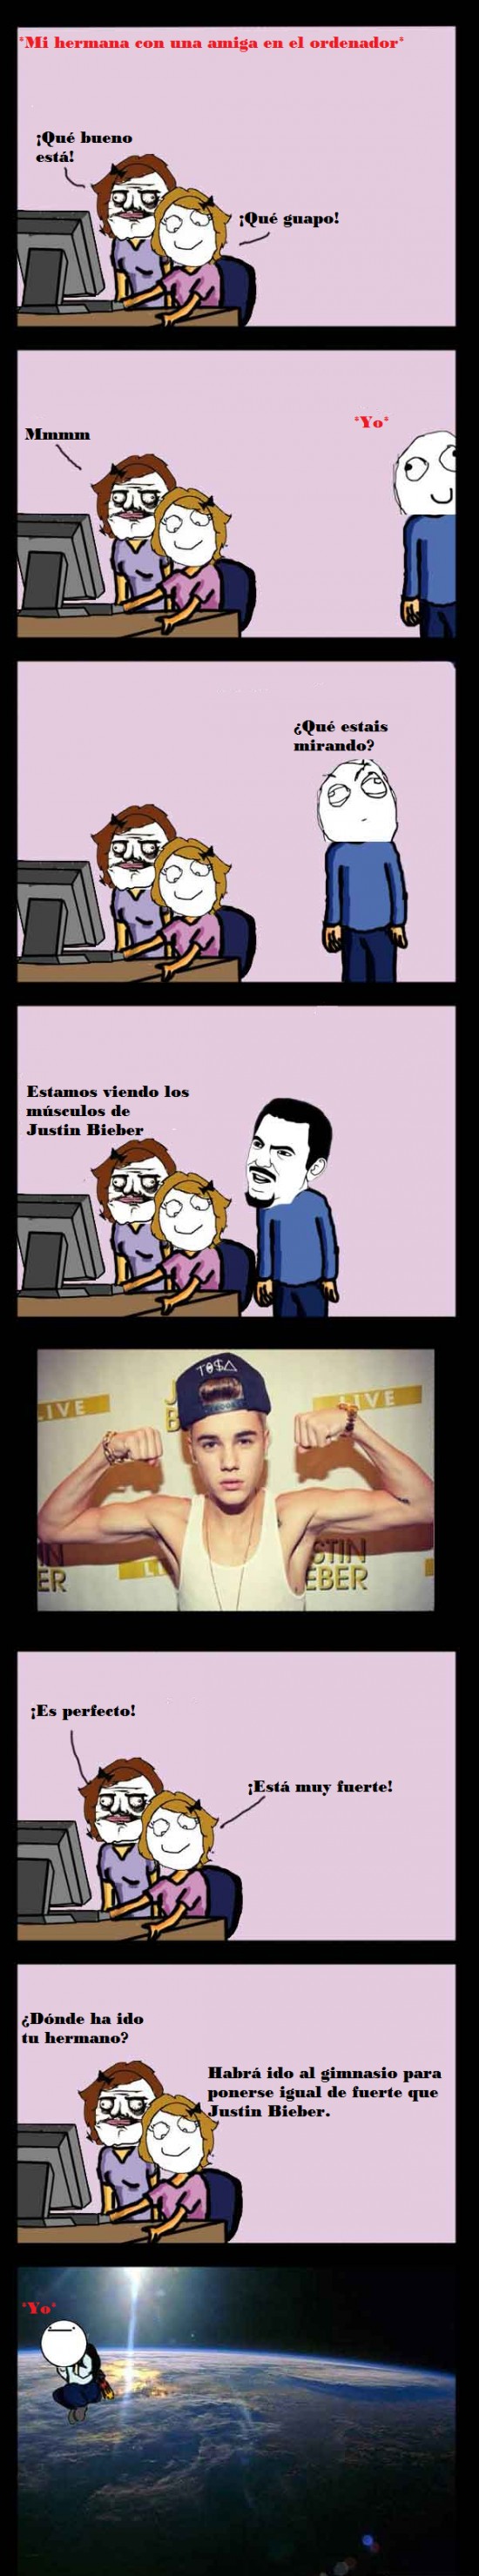 chicas,jb,justin bieber,musculos,nothing to do here,volar